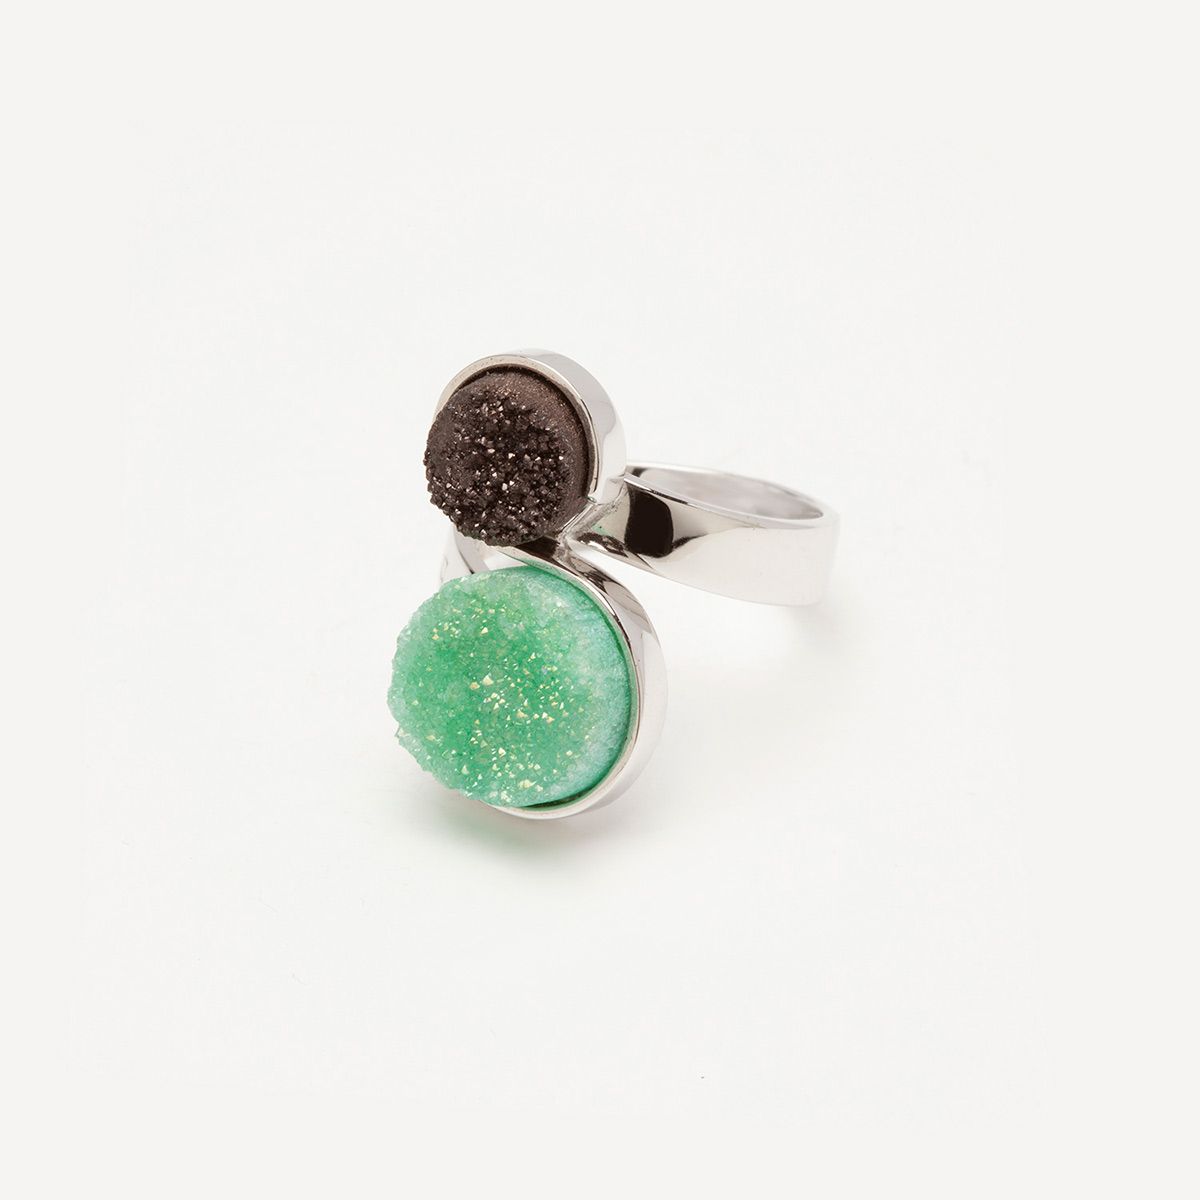 Yin handmade sterling silver ring, green and black agate druzy 1 designed by Belen Bajo